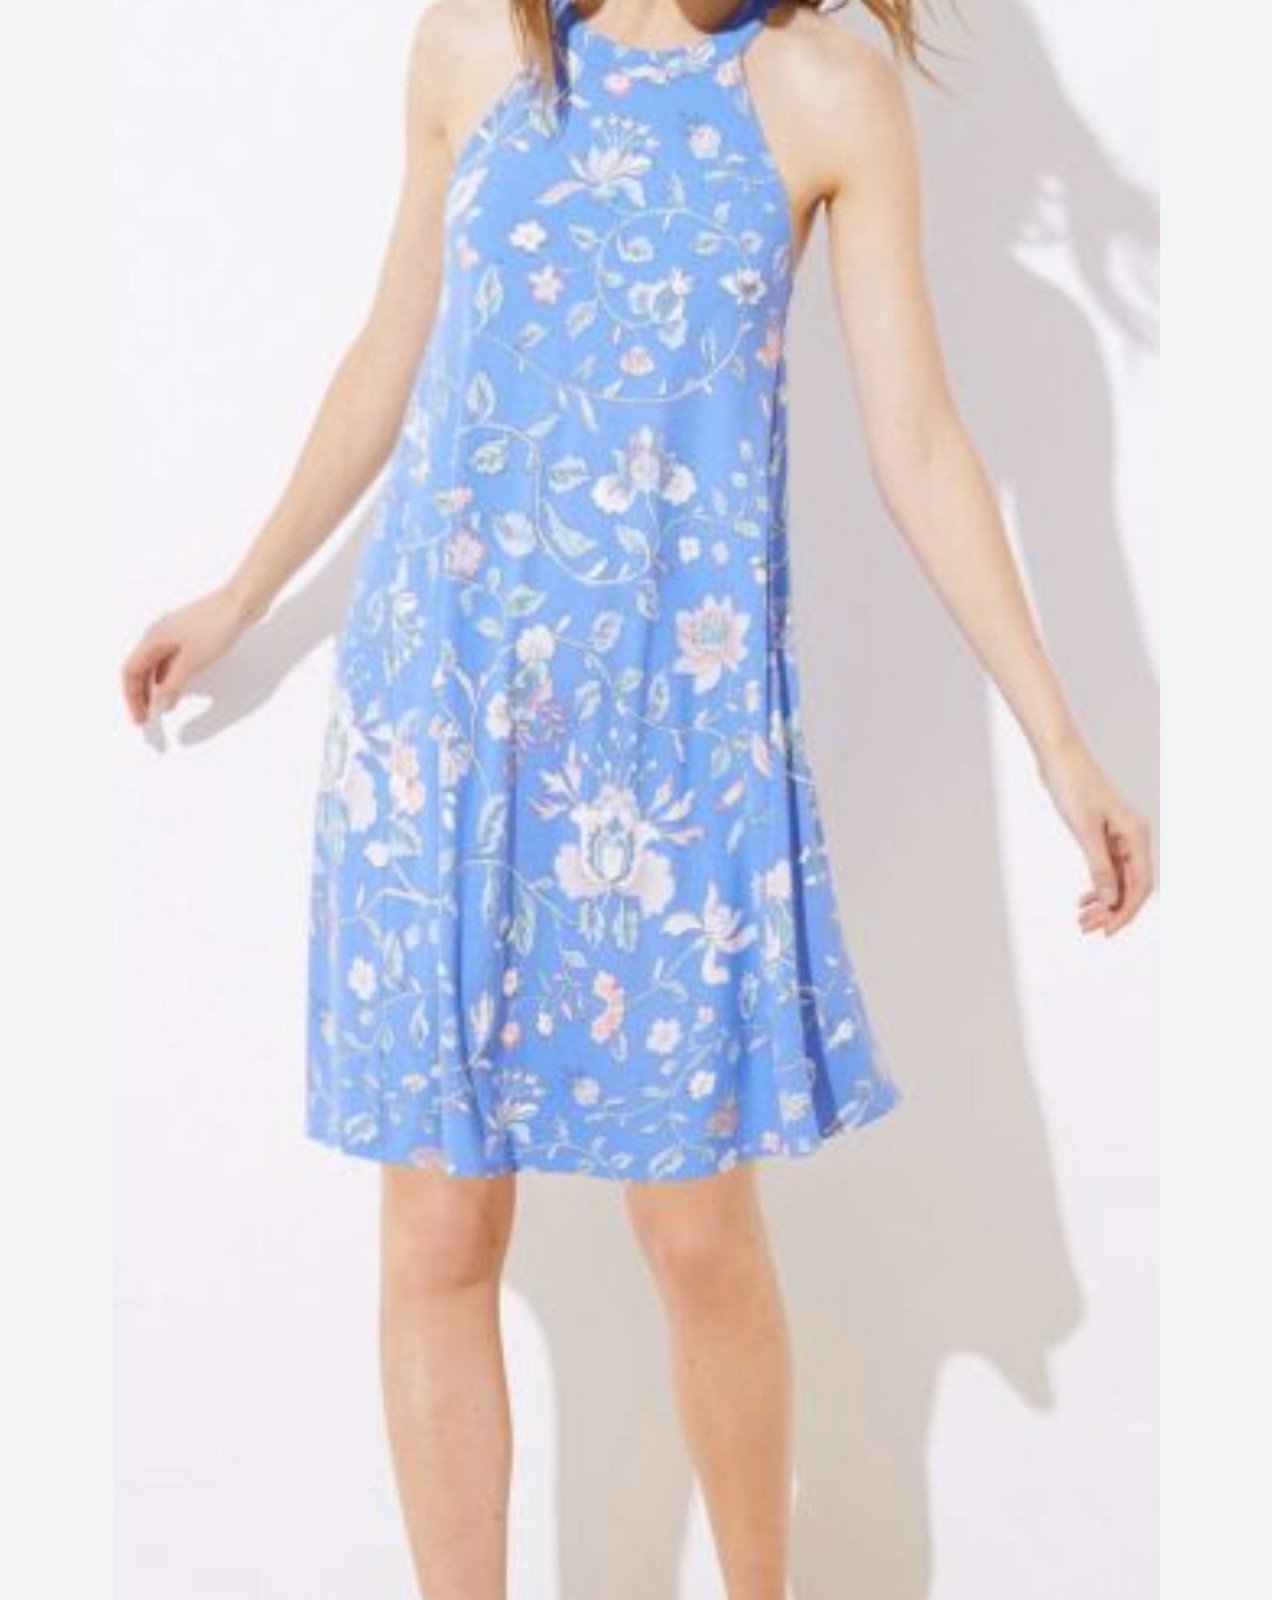 Authentic NWT Loft Floral Cut Out Back Swing Dress n7sN